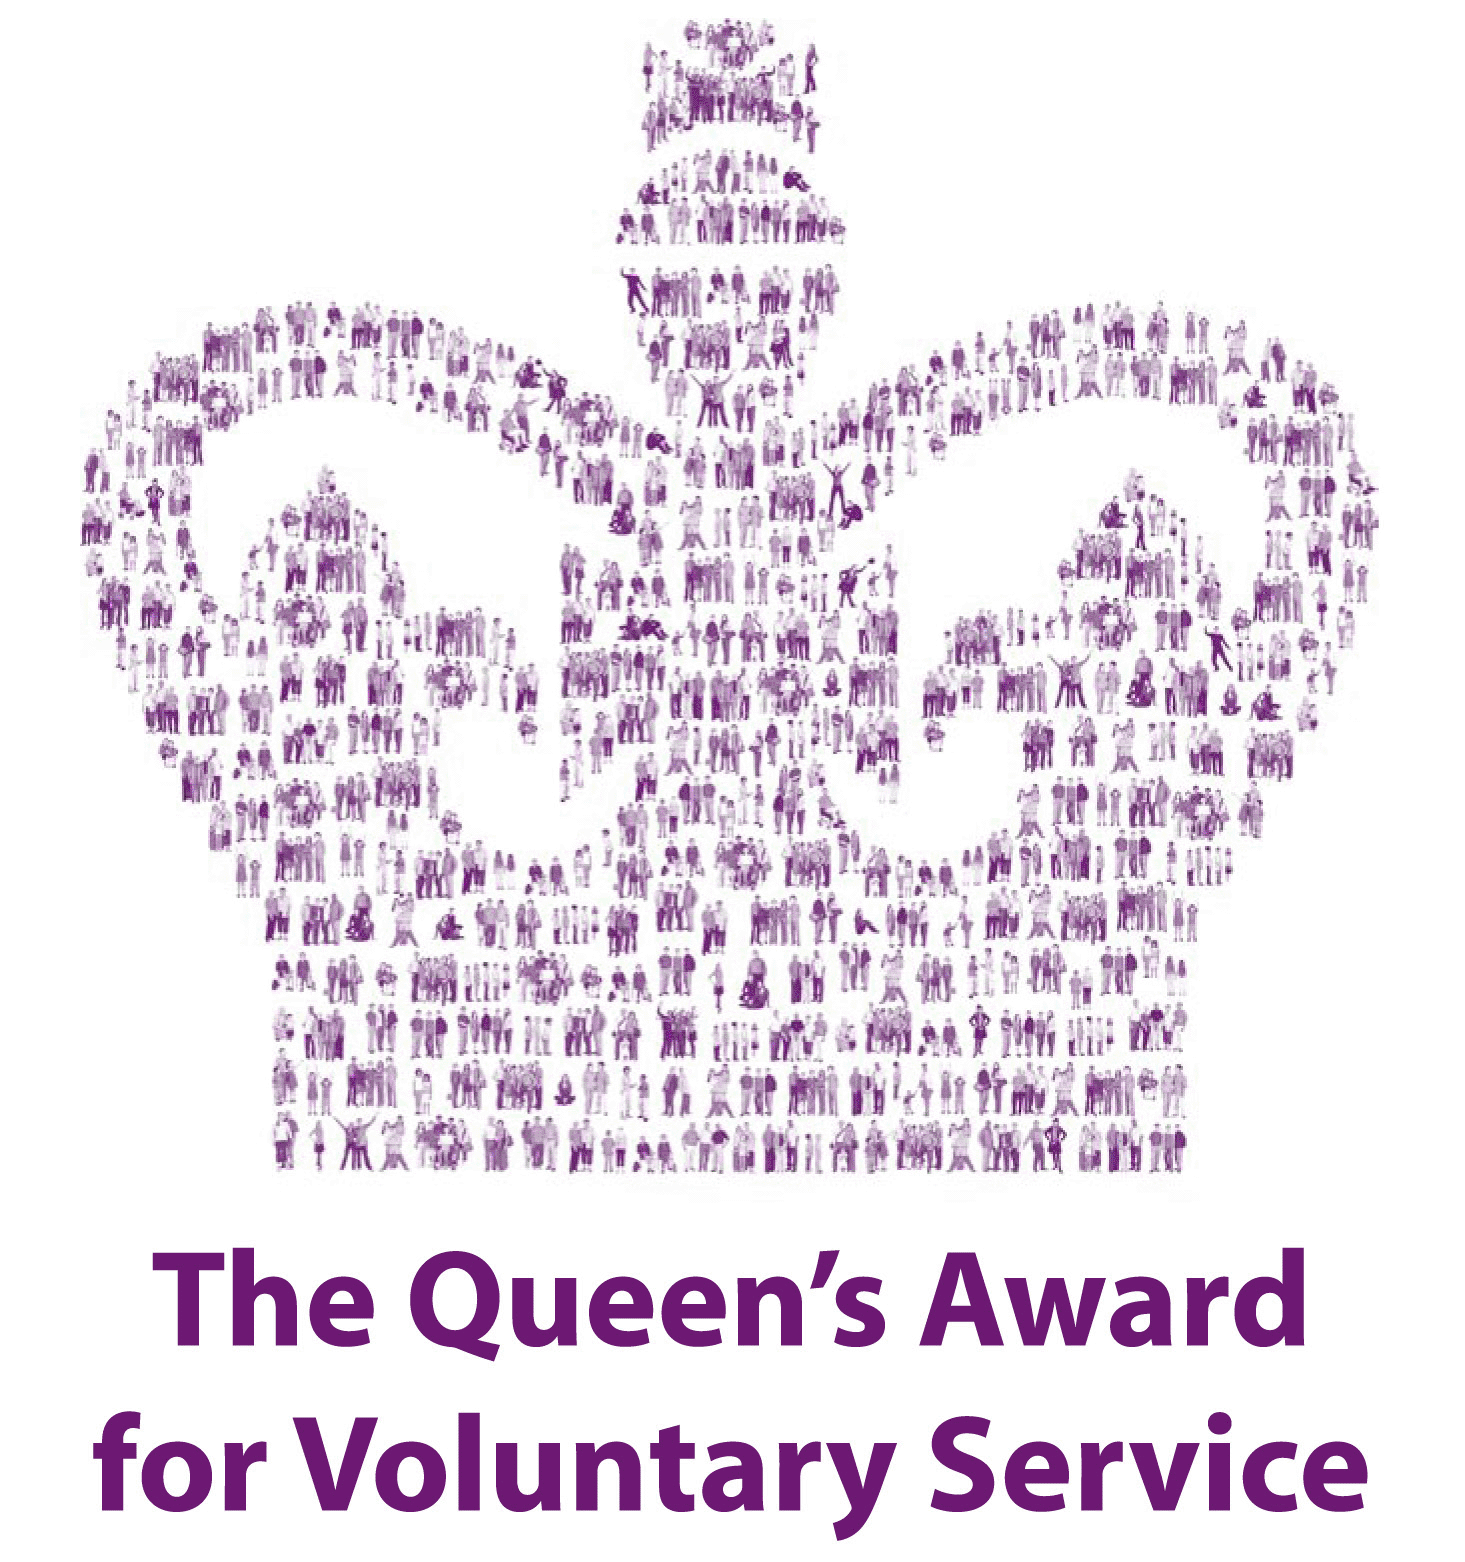 Queen's award for voluntary service 2016.